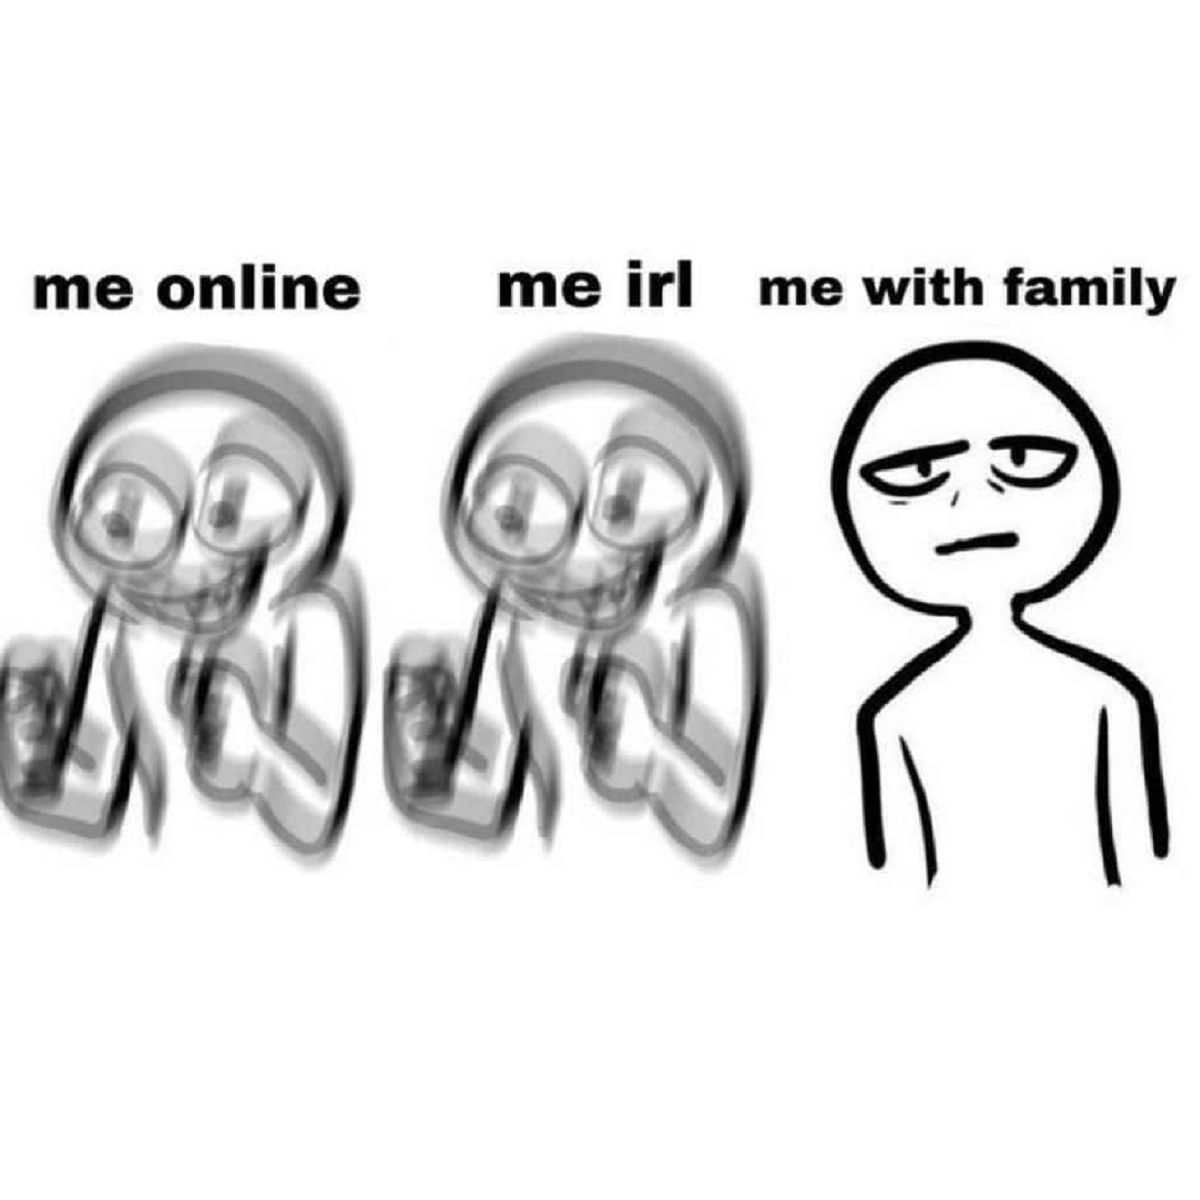 friendship dynamics meme - me online me irl me with family A